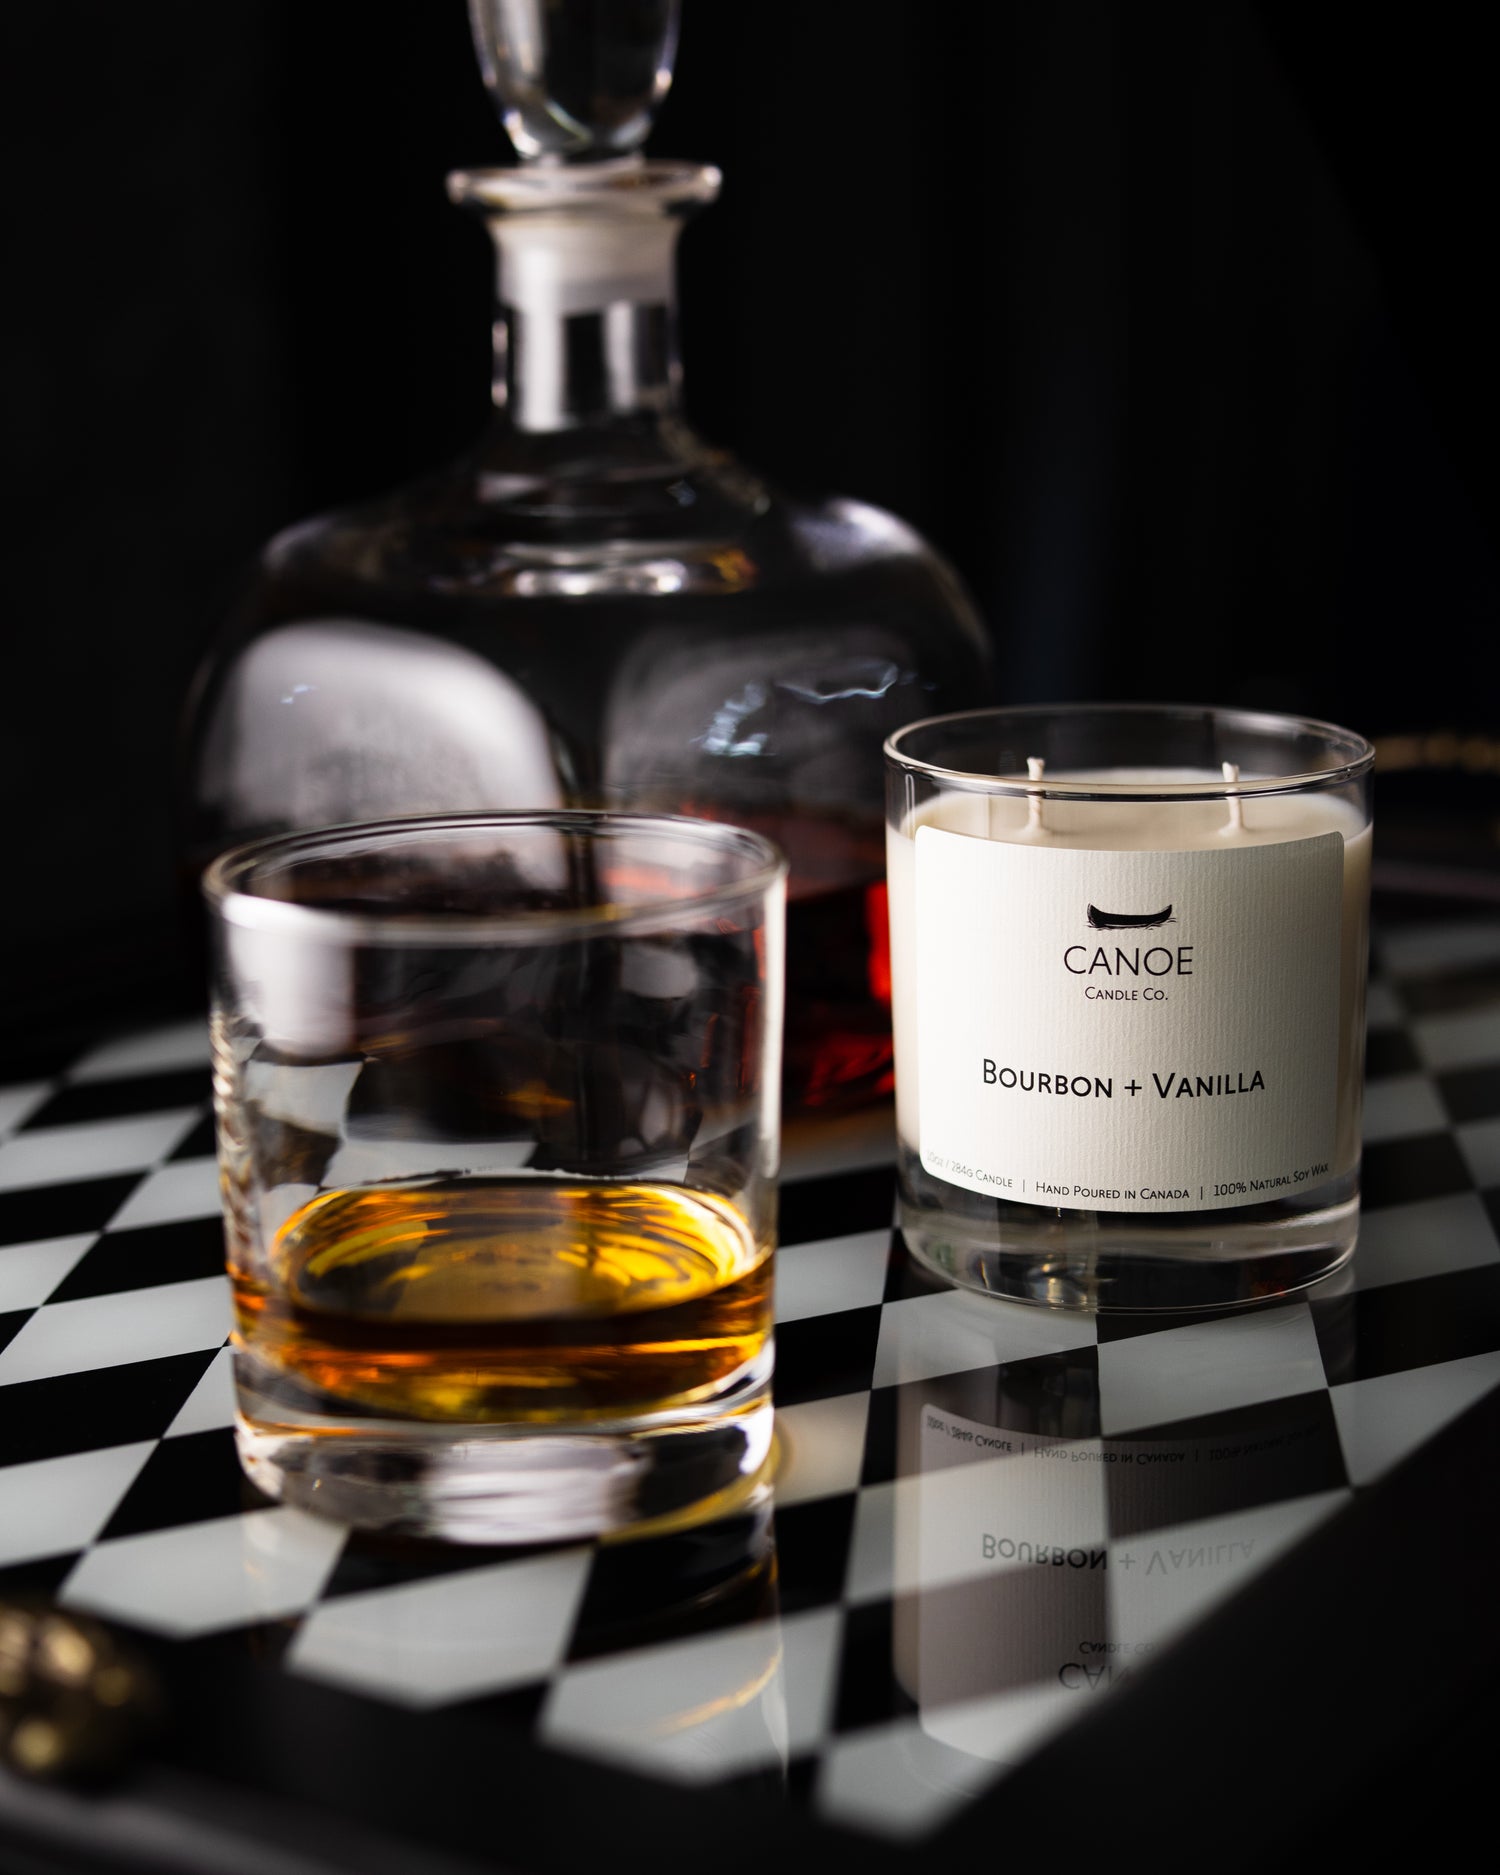 CANOE Candle Co.'s Bourbon + Vanille 10oz soy wax candle with a reused glass container with bourbon.